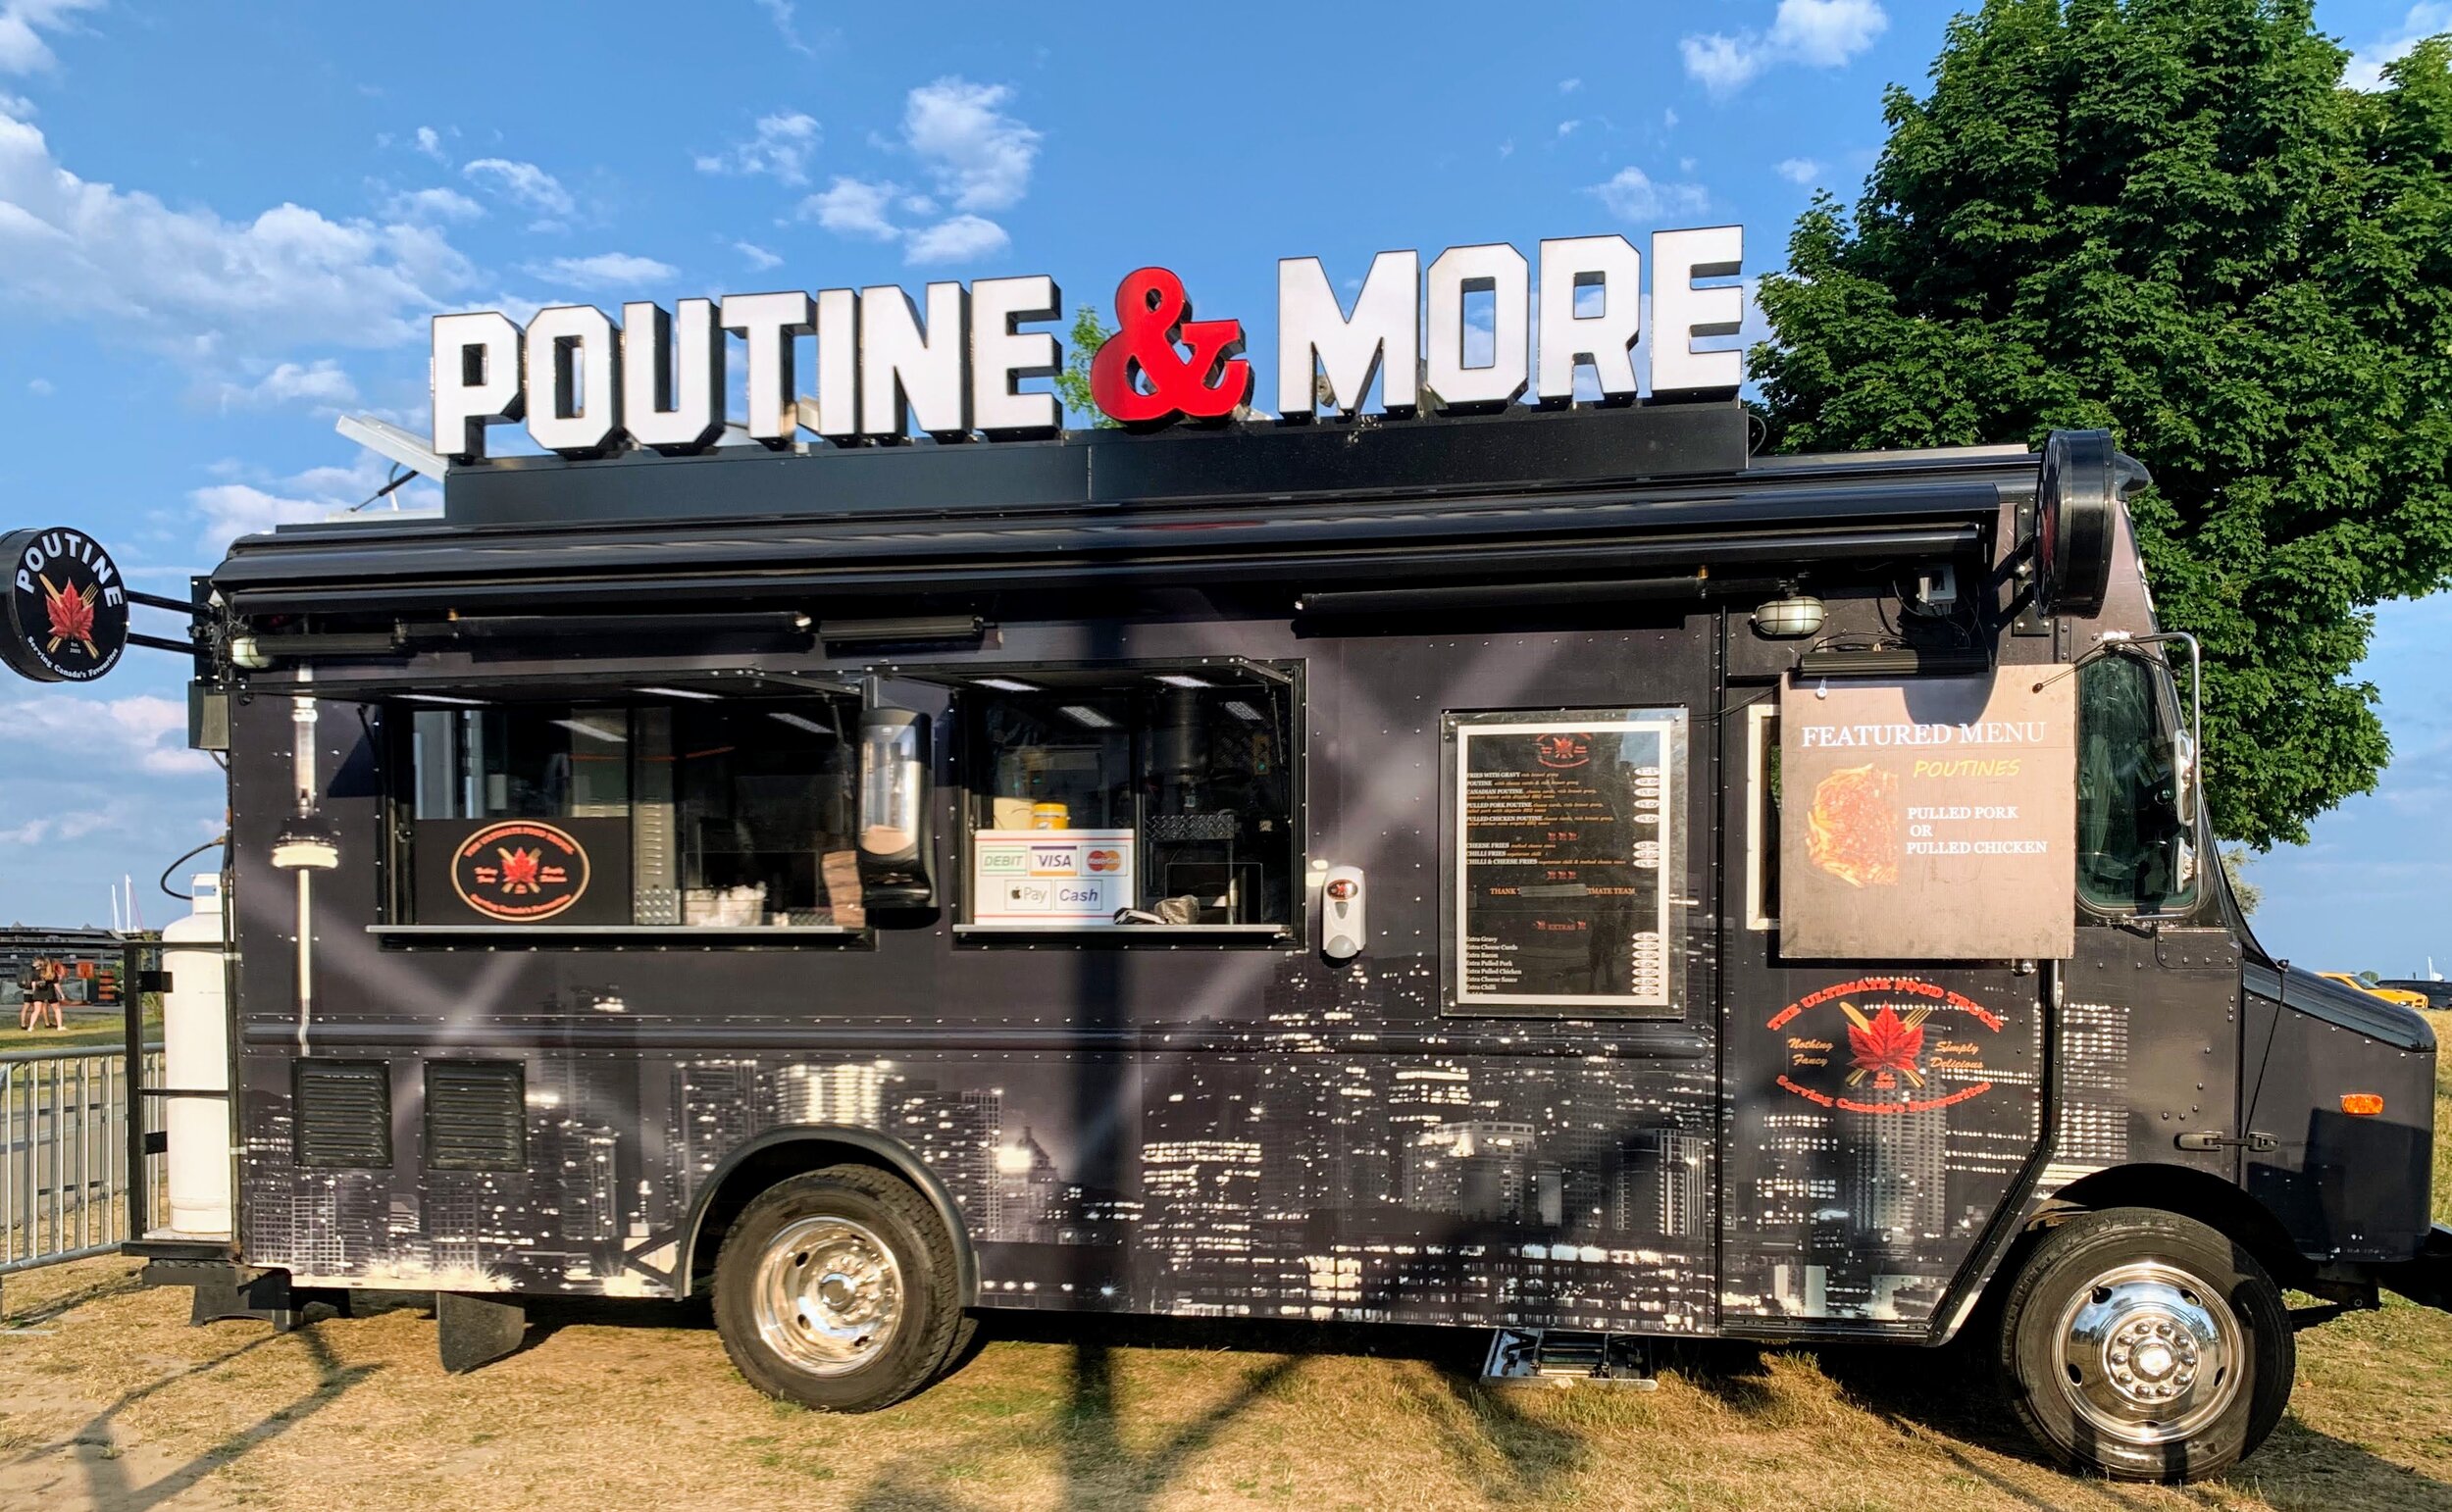 Important Things to Know Before Starting Up a Food Truck Business